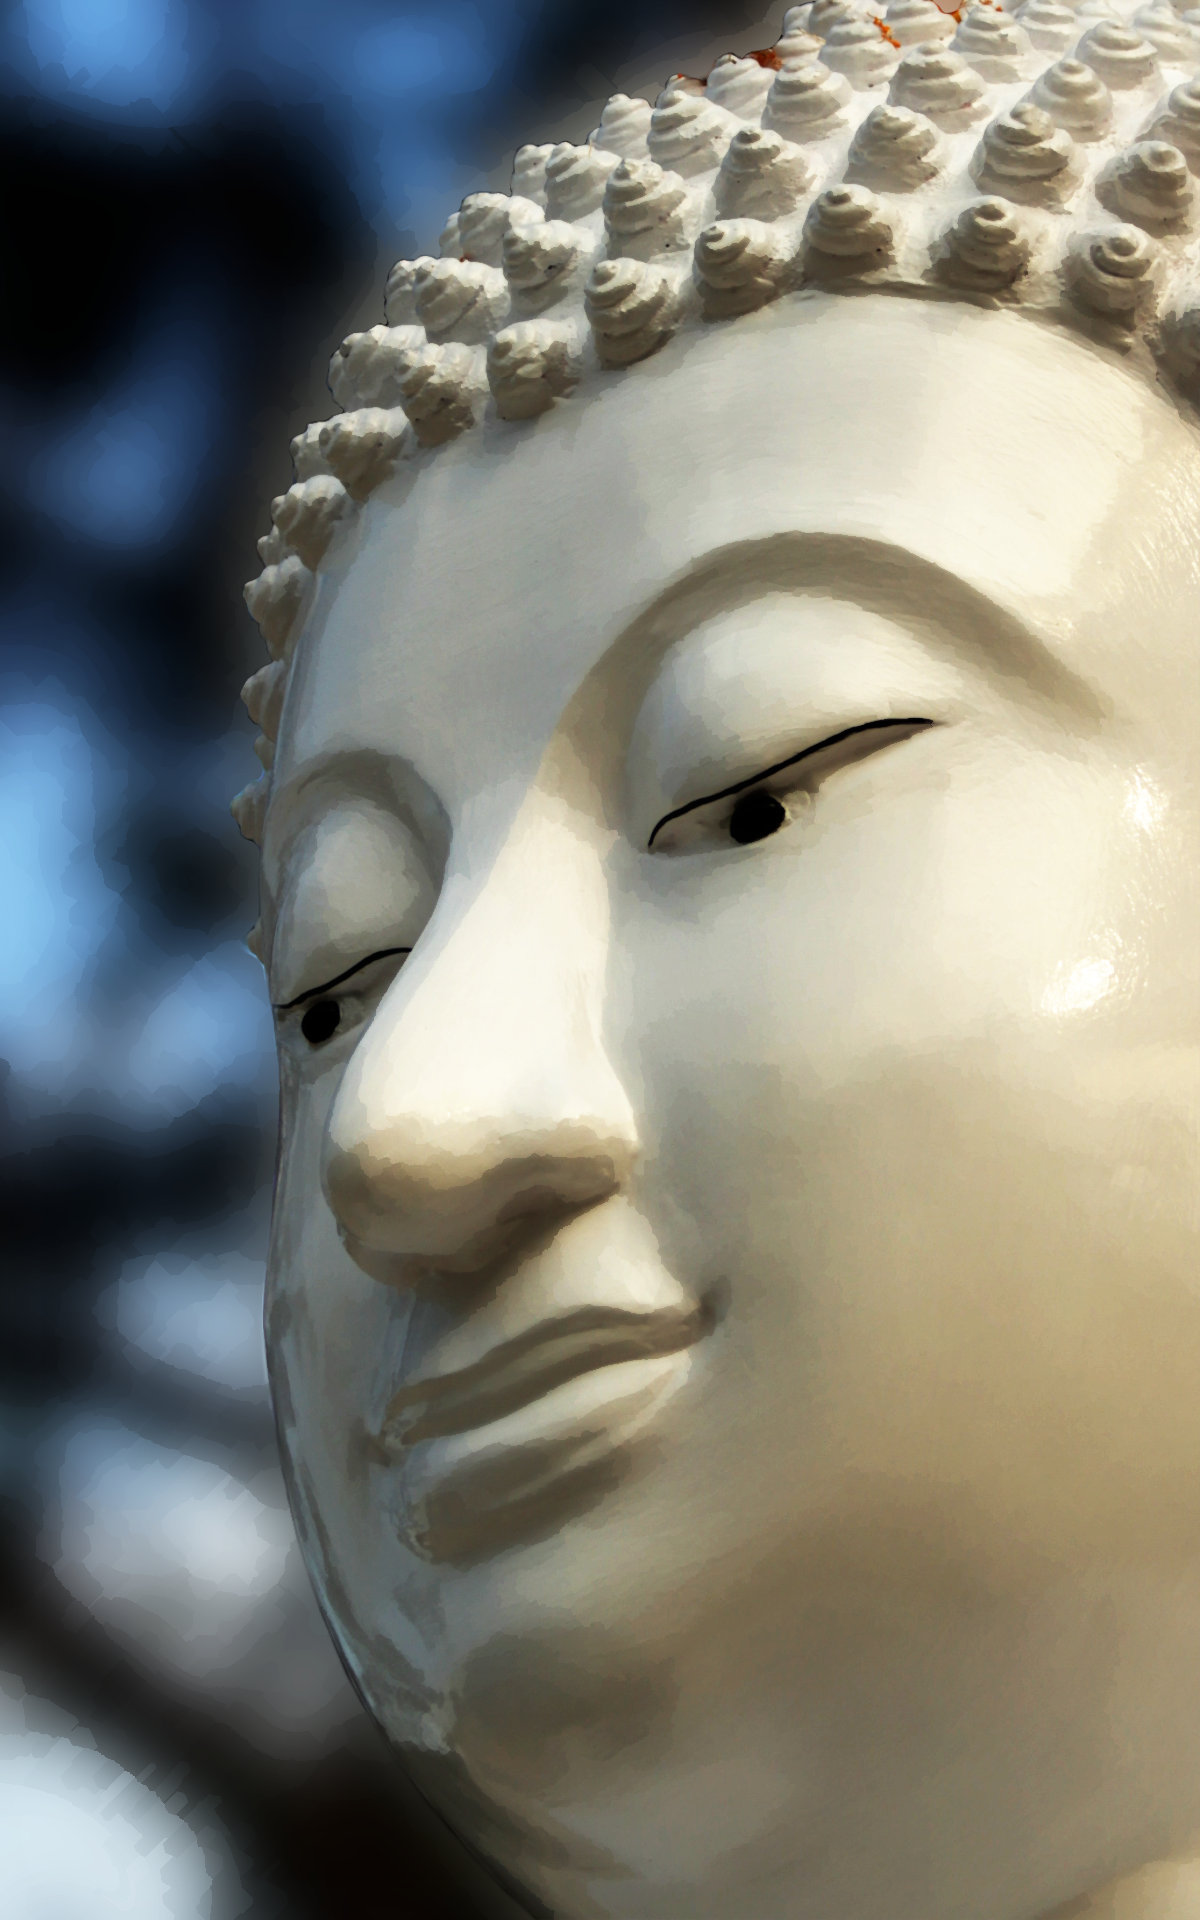 The white Buddha's face